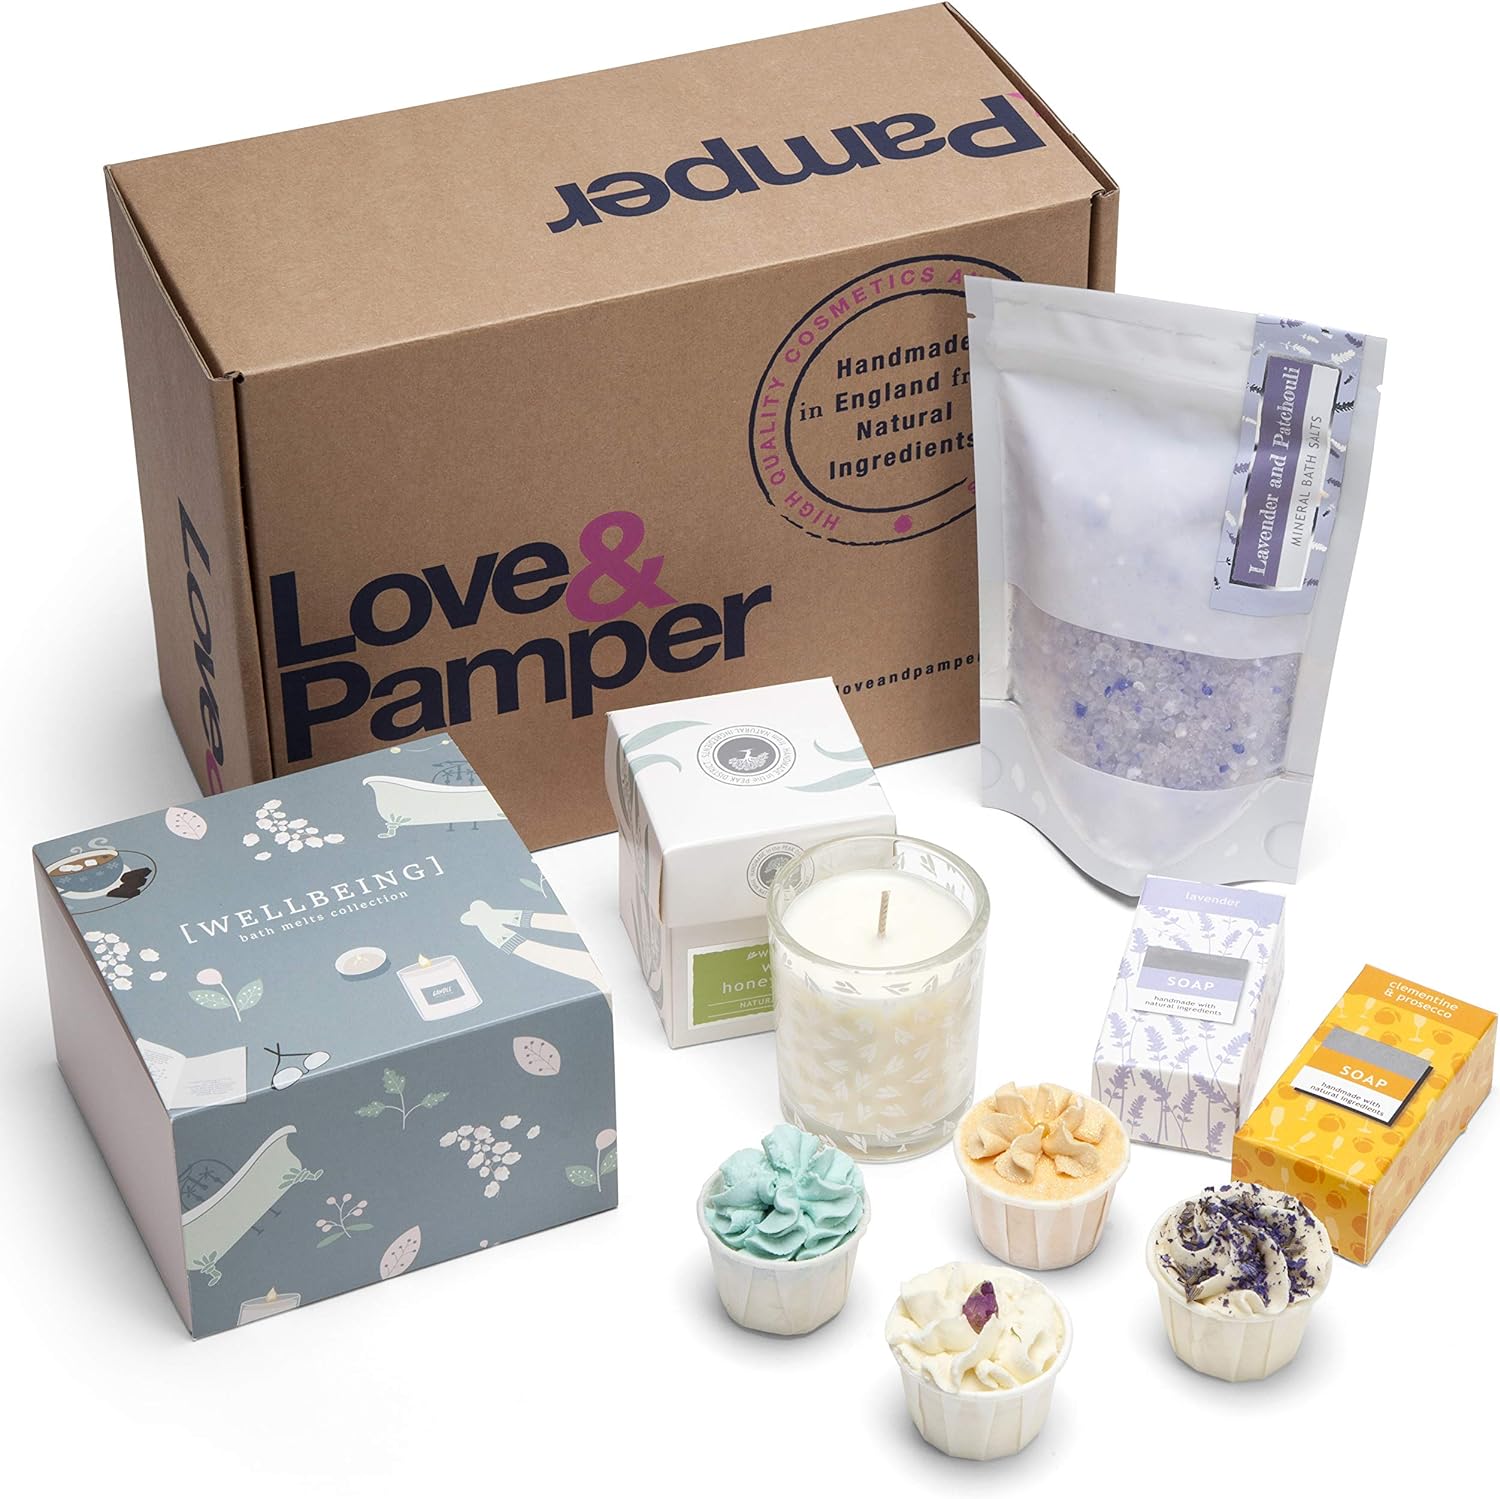 Love & Pamper - Hand Made Relaxation Pamper Wellbeing Gift Set, 4 Relaxation Bath Melts, Dead Sea Bath Salts, Lavender/Patchouli, Soy Wax Candle, Wild Honeysuckle, Lavender Soap, Sweet Orange Soap - 8588